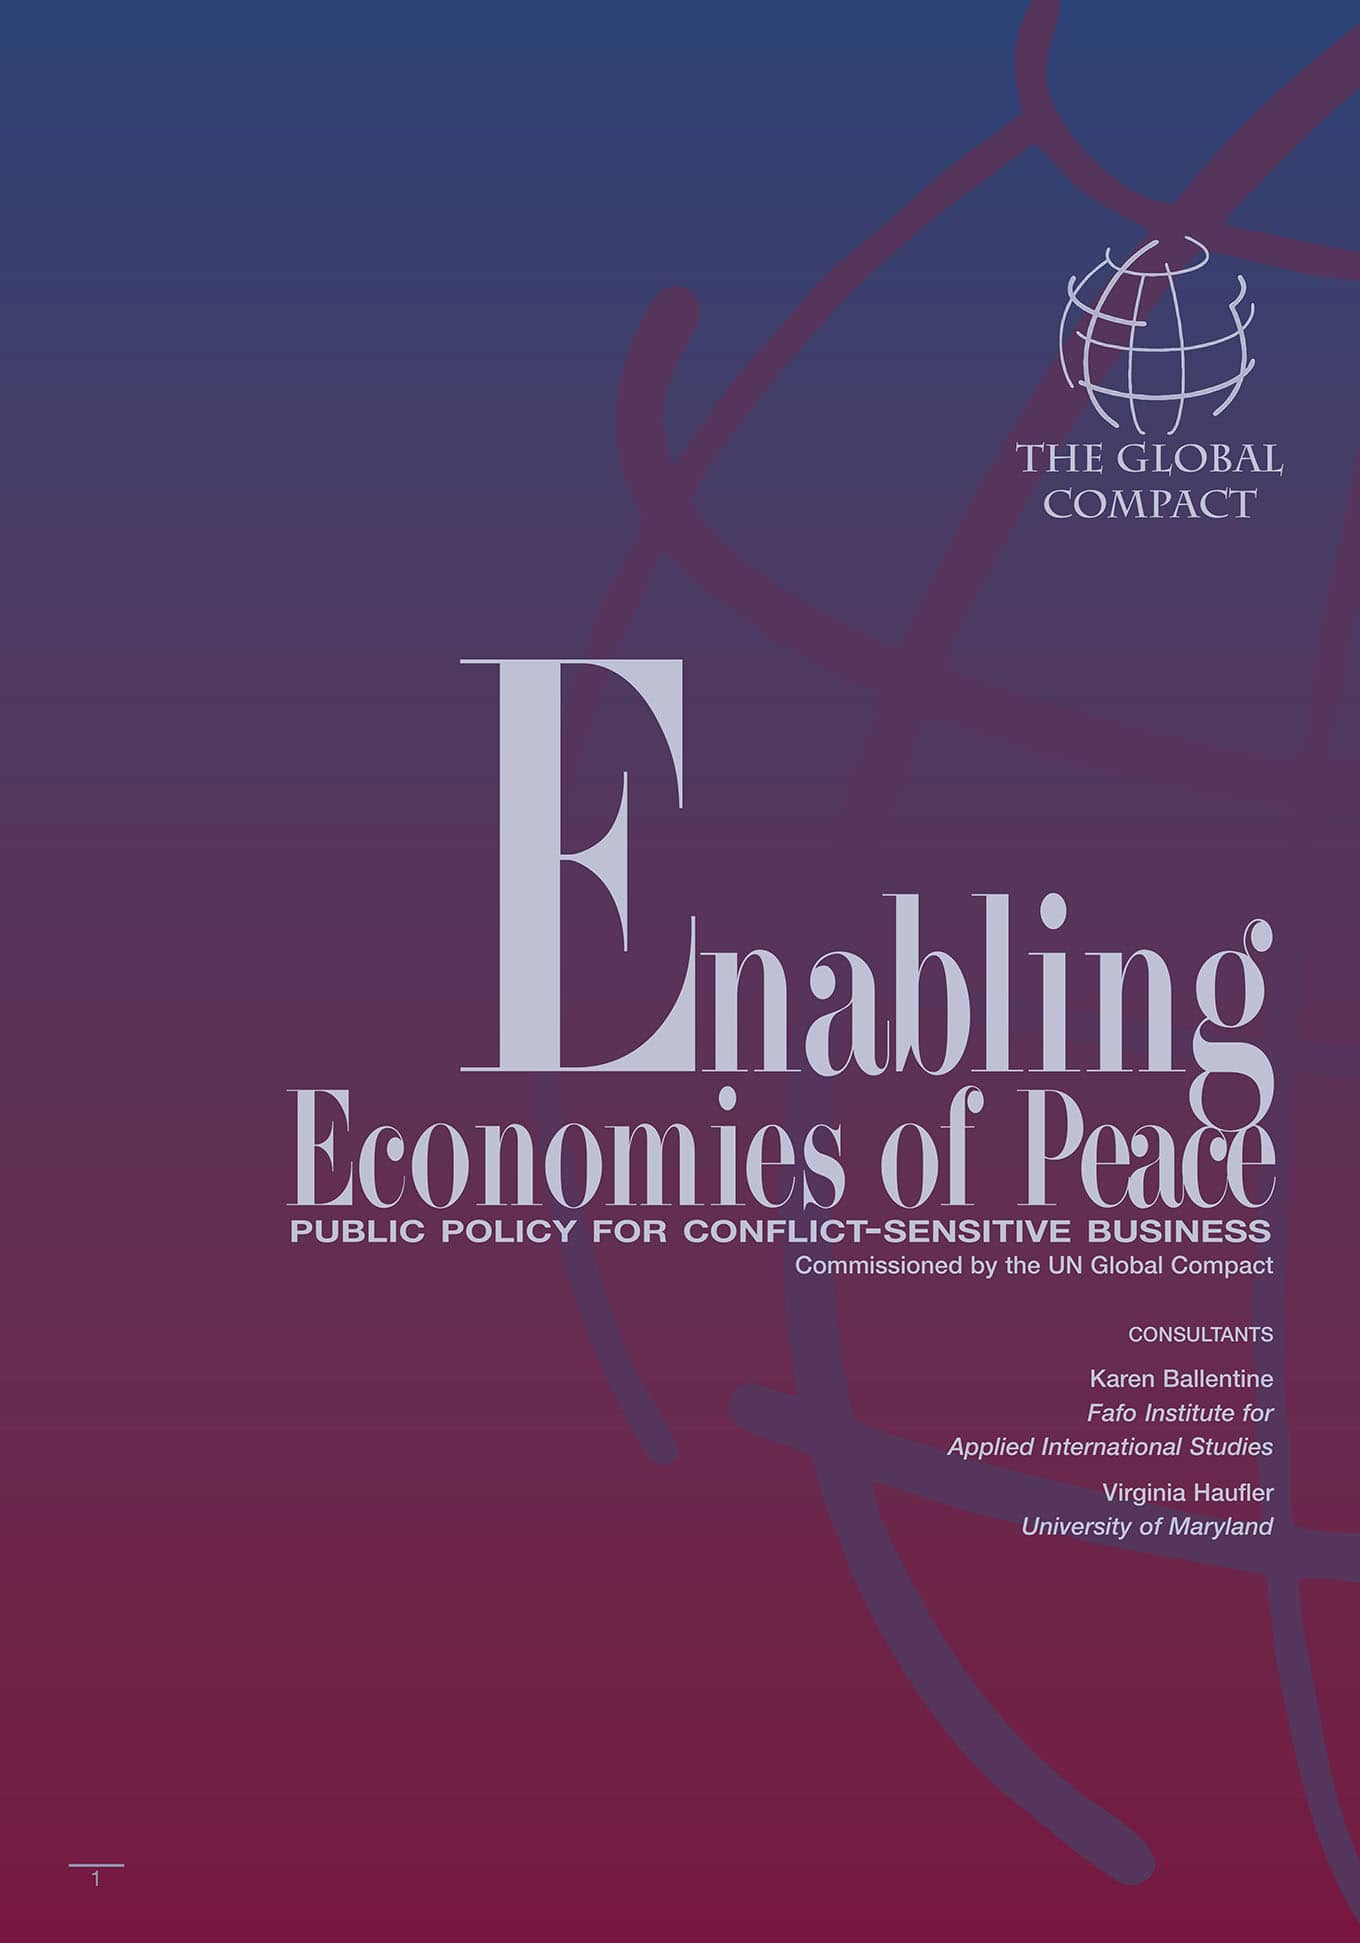 Enabling Economies of Peace - Public Policy for Conflict-Sensitive Business (Commissioned by the UN Global Compact, 2005)